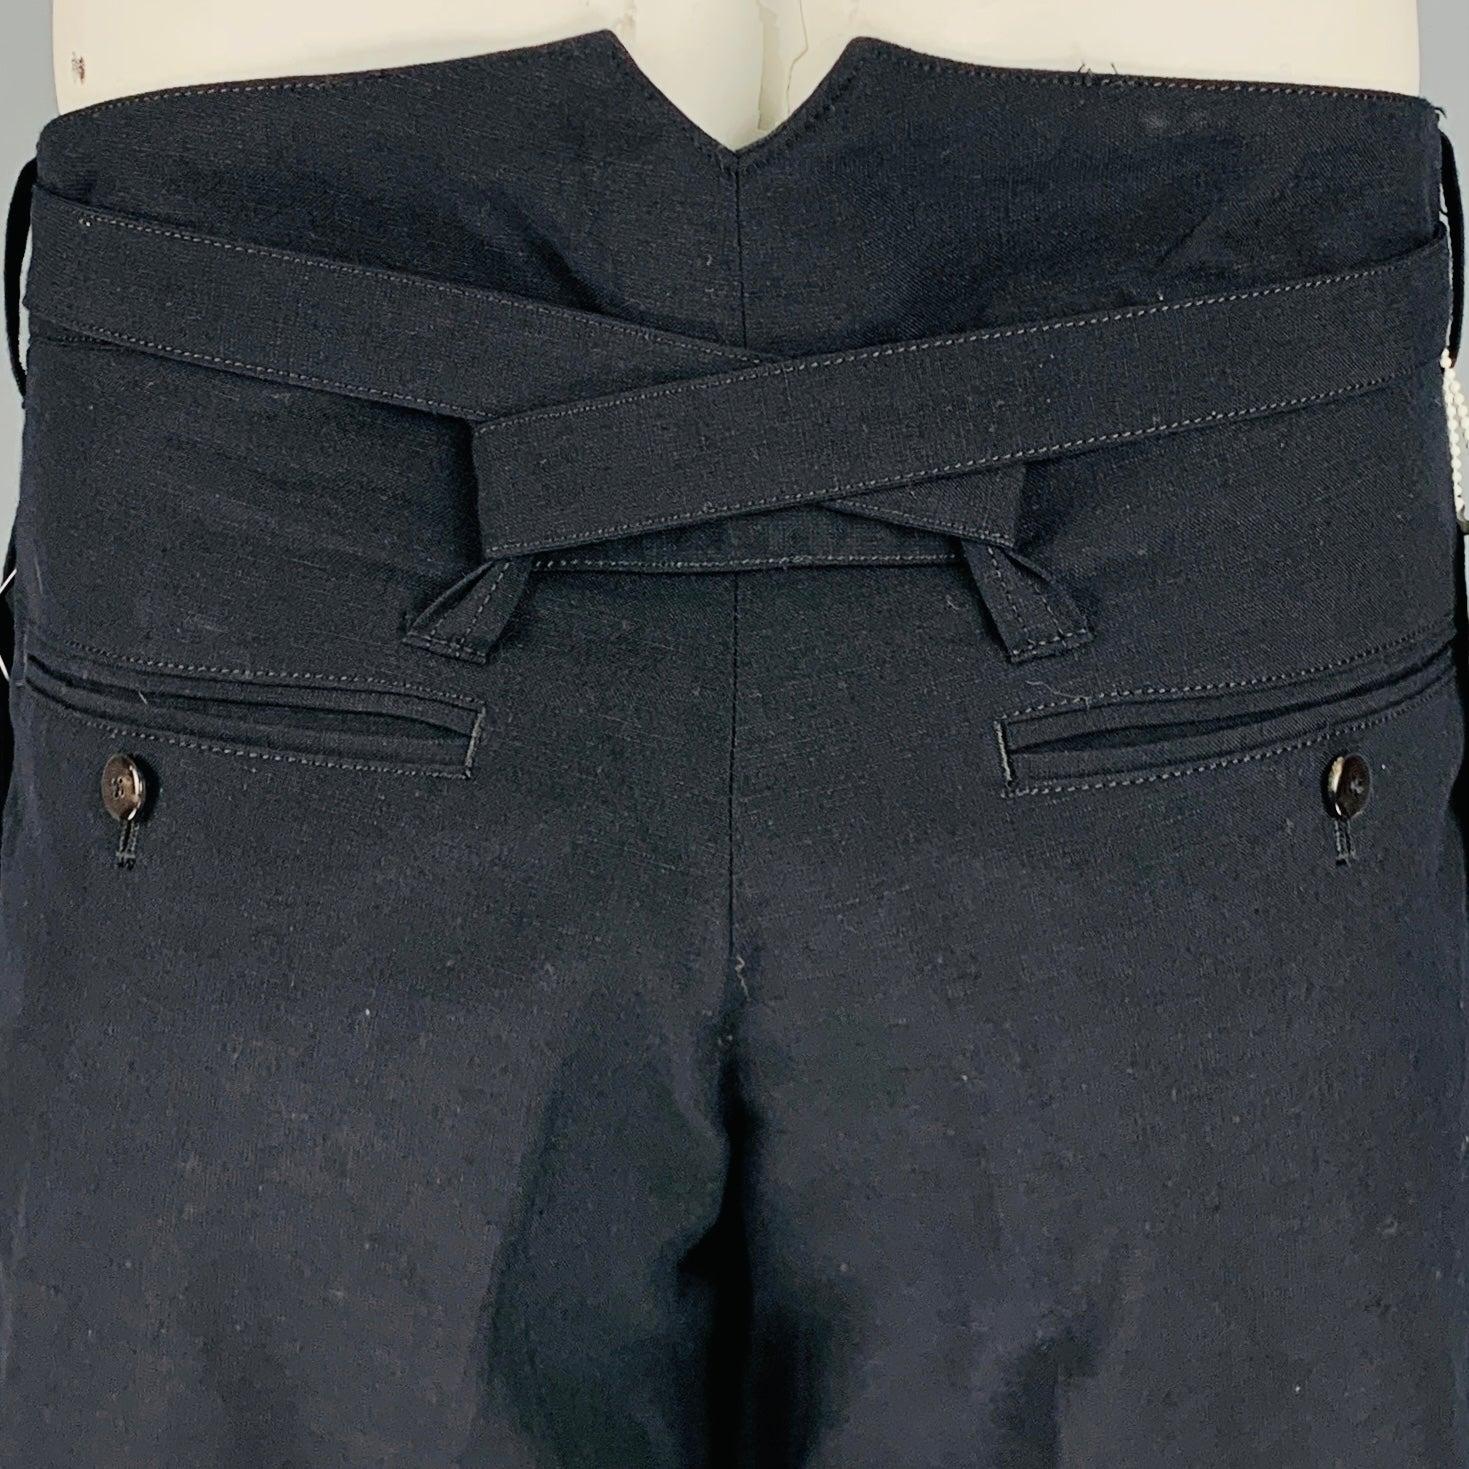 VISVIM Size L -Hakama Pants- Black Wool Linen Pleated Dress Pants In Good Condition For Sale In San Francisco, CA